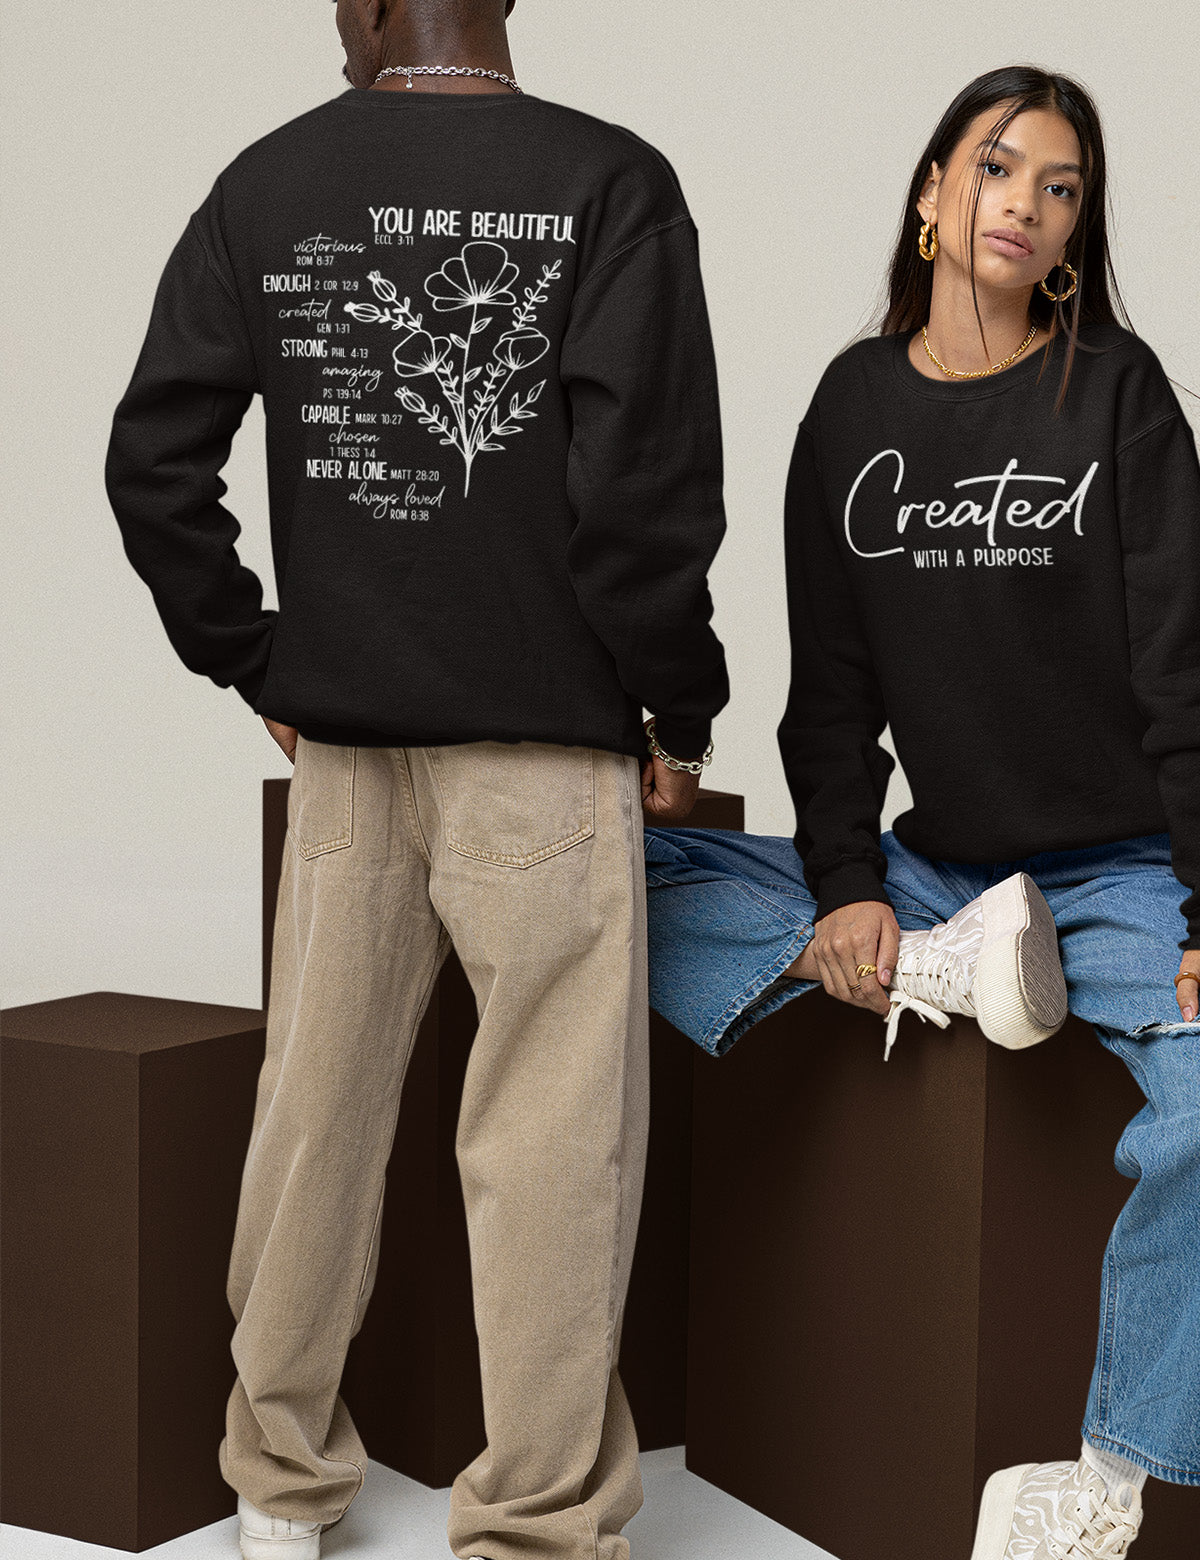 You Are Beautiful Victorious Enough Strong Capable Never Alone Always Loved Front Created With A Purpose Christian SweatshirtsYou Are Beautiful Victorious Enough Strong Capable Never Alone Always Loved Front Created With A Purpose Christian Sweatshirts